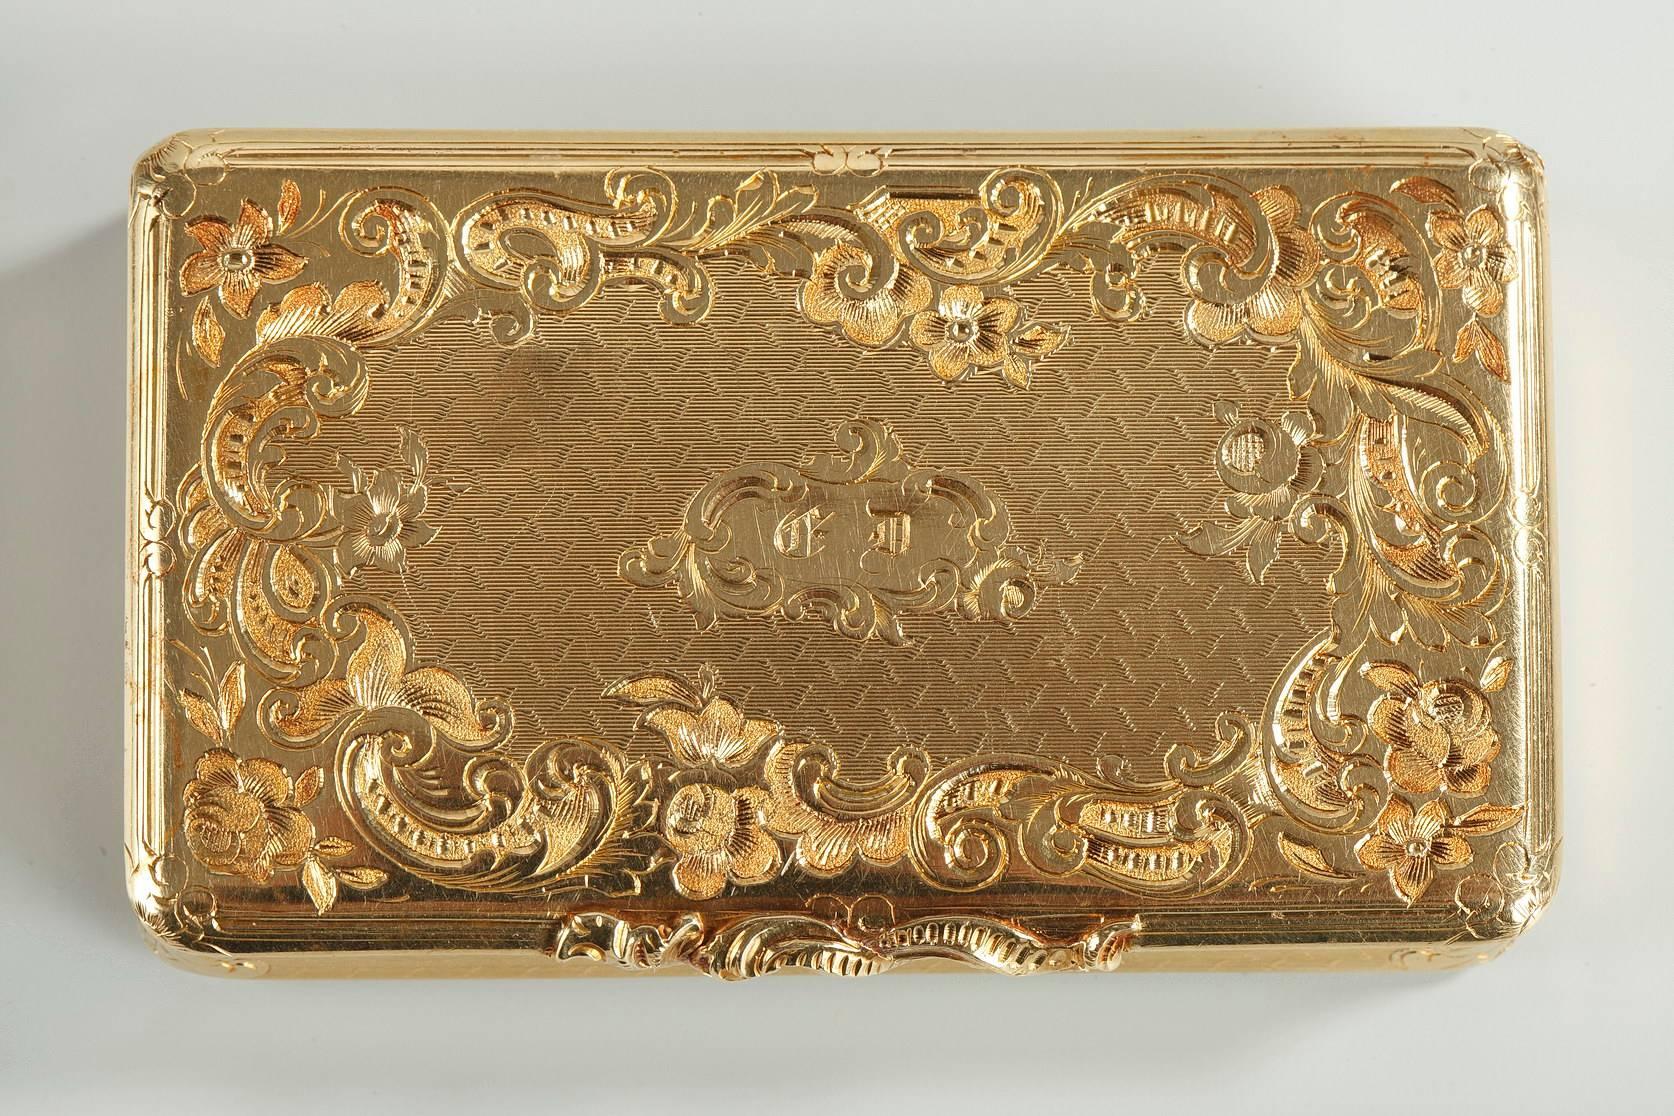 Small, gold snuff box featuring Rocaille motifs. Its cover is embellished with delicately sculpted scrollwork and asymmetrical flowers, which revisits the Rocaille repertoire that was in vogue during the reign of France’s Louis XV. An intricate